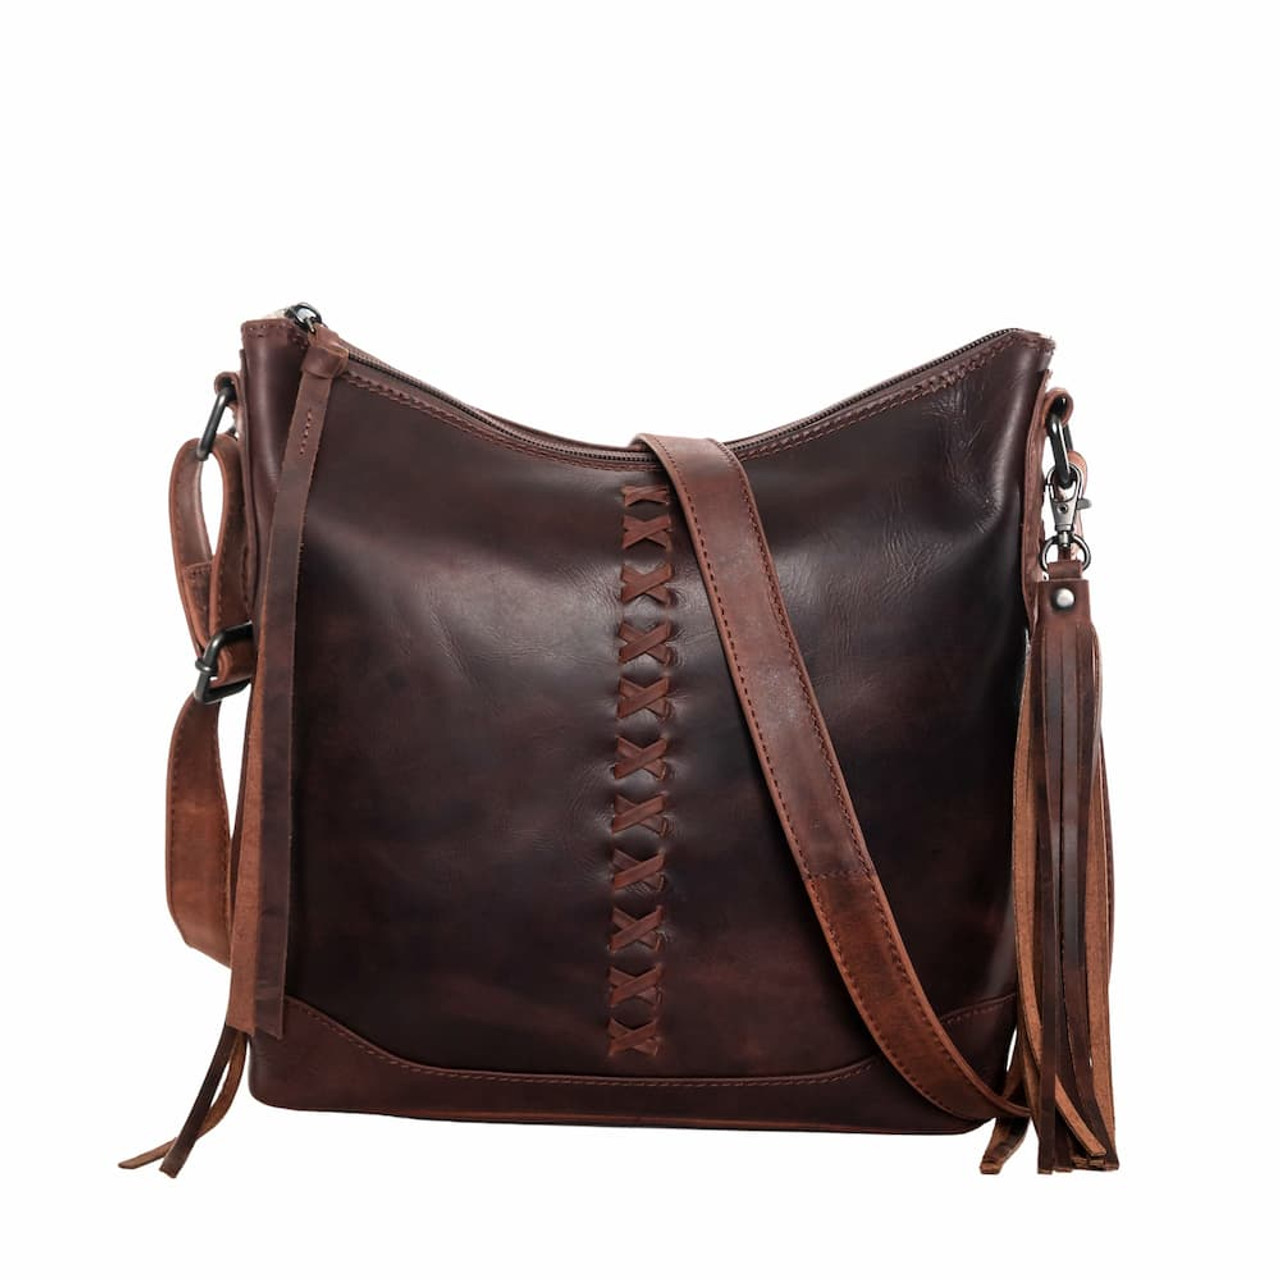 Personalized Leather Bags - Nancy Hue